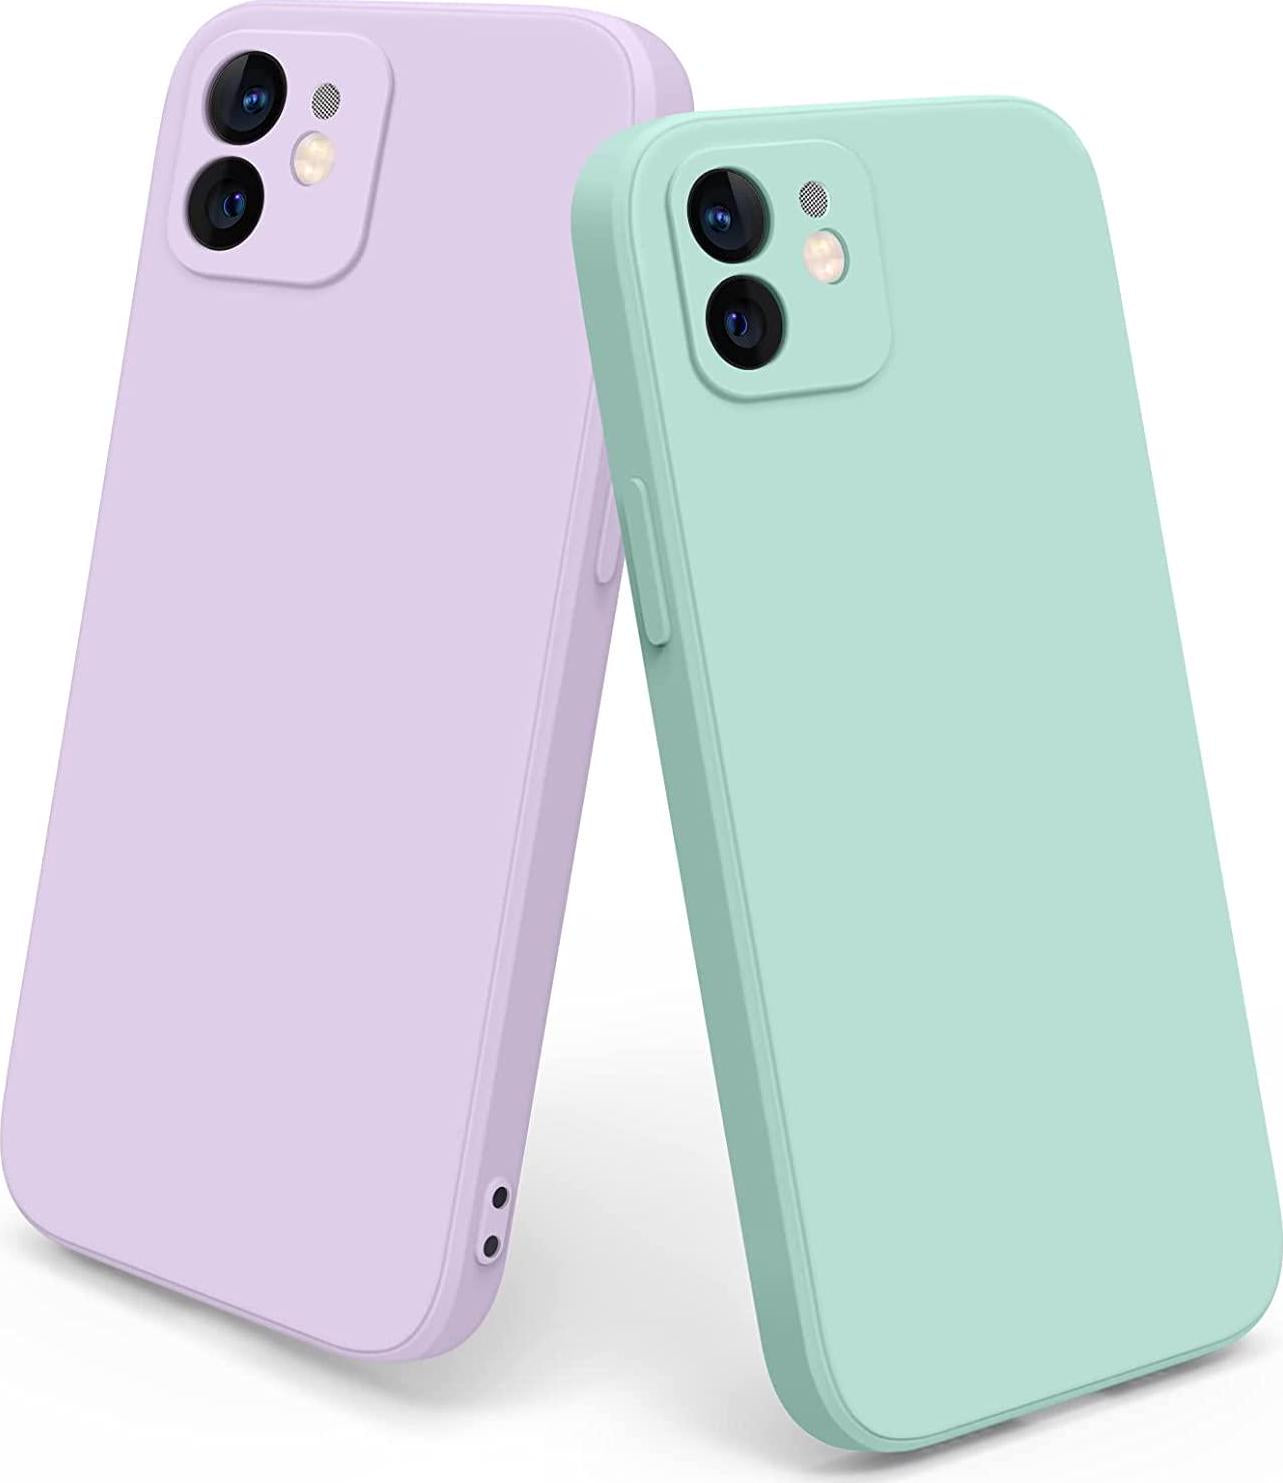 Meliya, Meliya Case for iPhone 12 Case, Slim Stylish Silicone Full-Body Protective Shockproof Bumper Cover for iPhone 12 6.1 Inch (2020) Phone Case (Violet+Light Cyan)